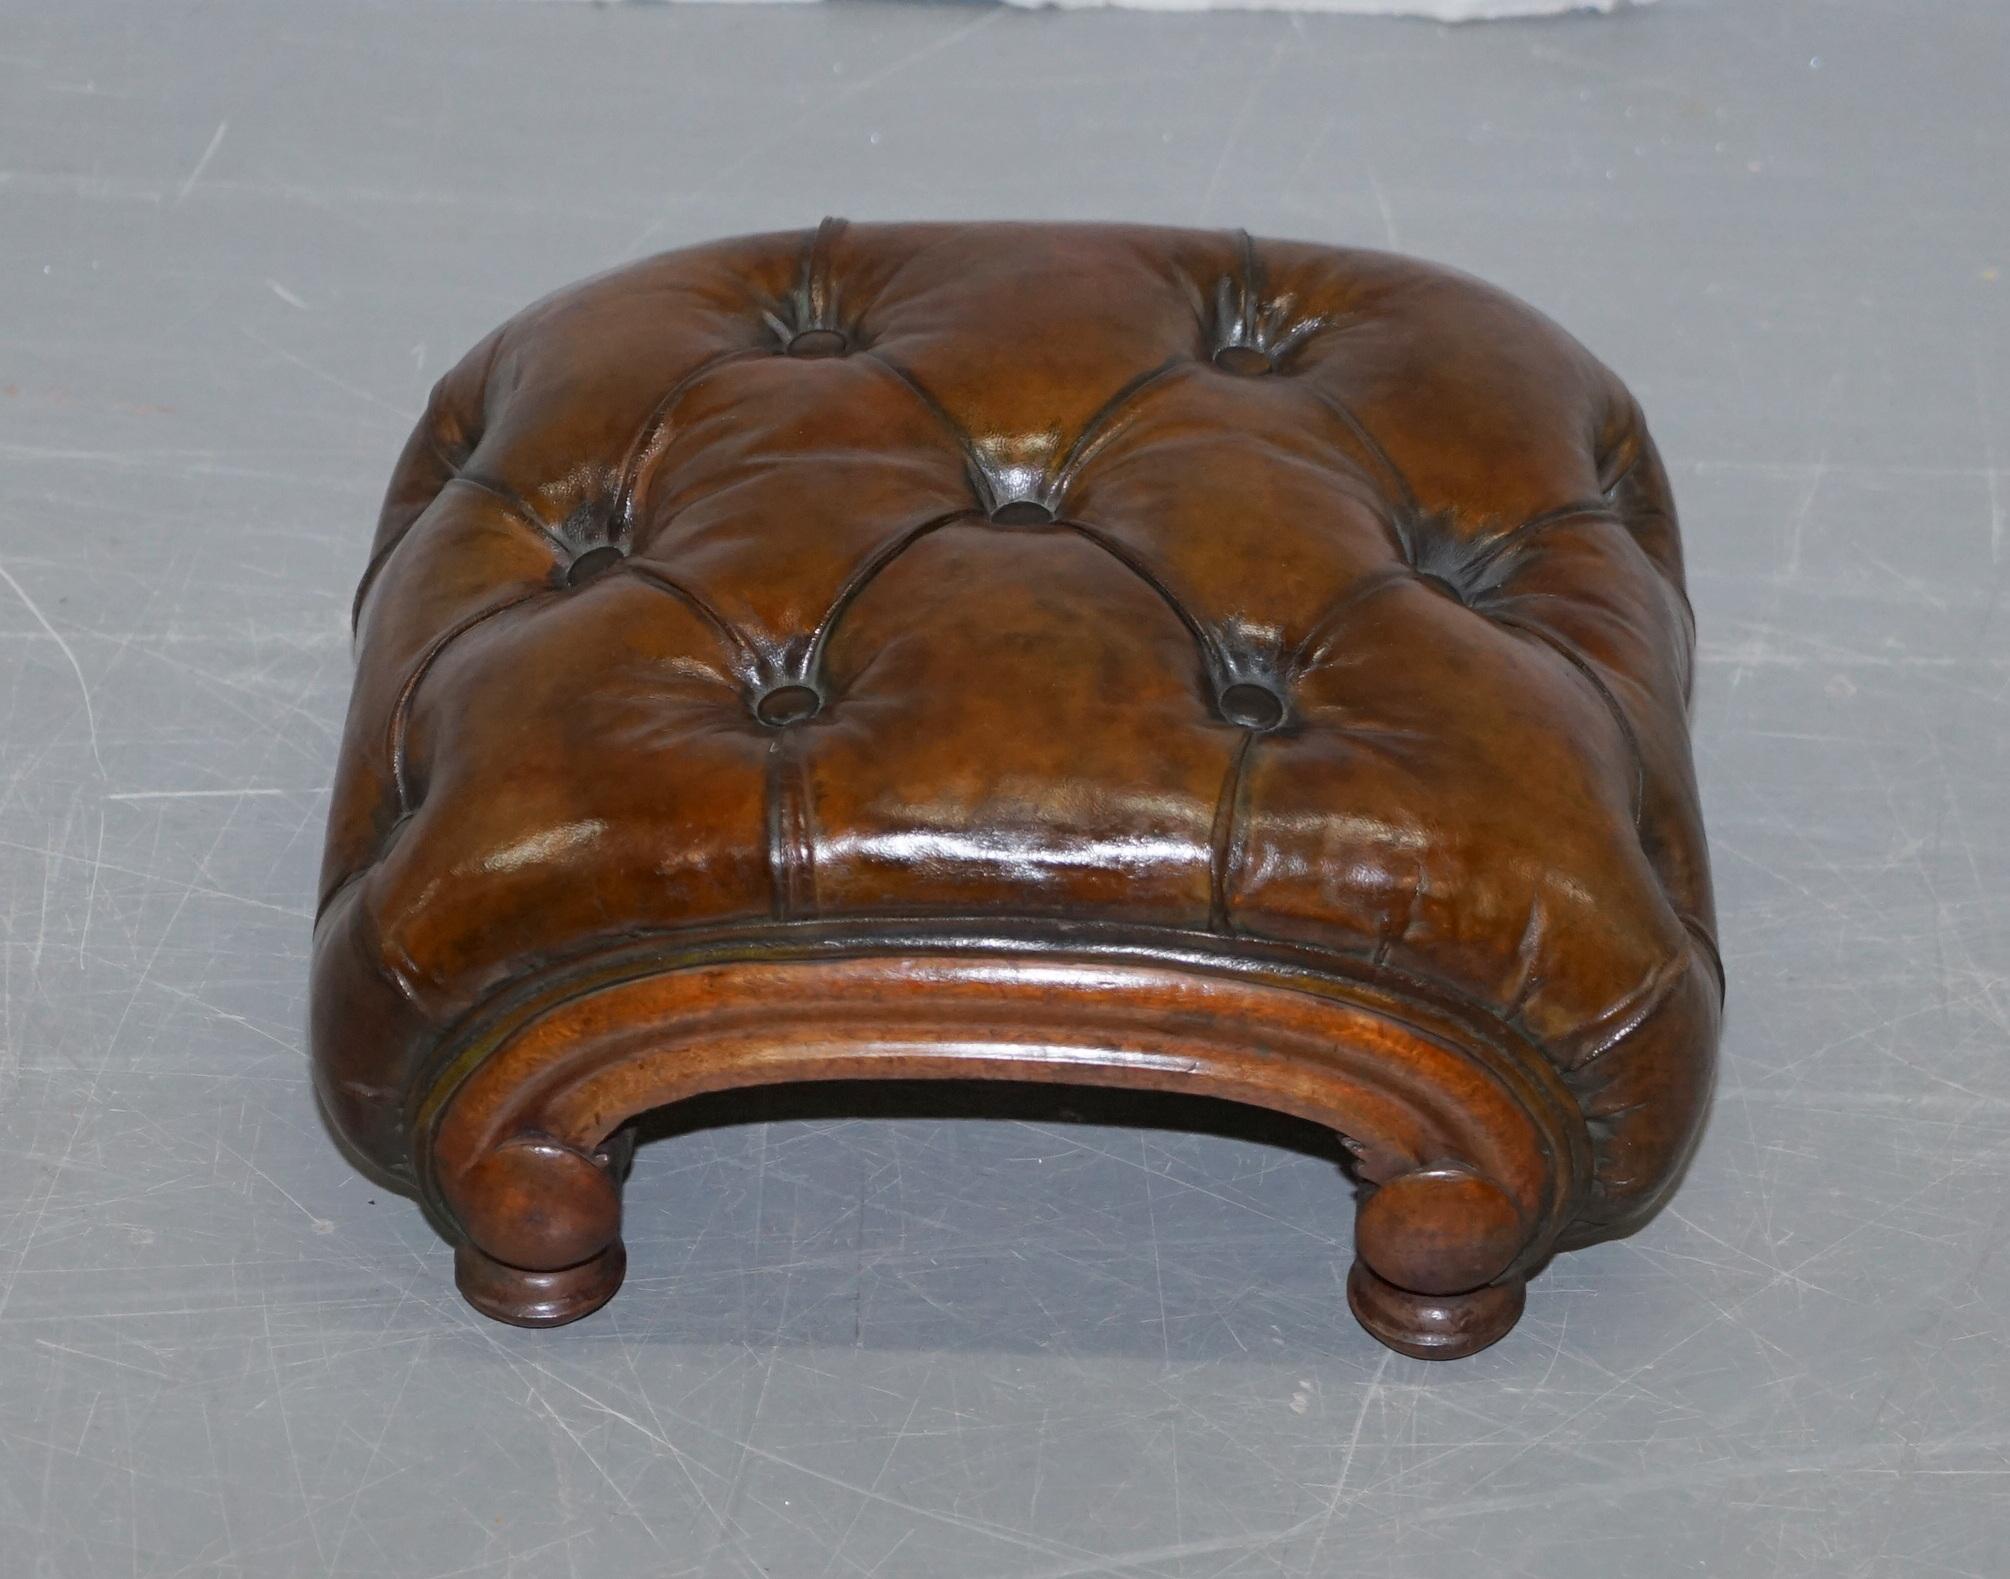 We are delighted to offer for sale this lovely handmade in England circa 1780 George III chesterfield buttoned walnut framed brown leather footstool

A very attractive small curved footstool, it is one of the oldest I have come across and would